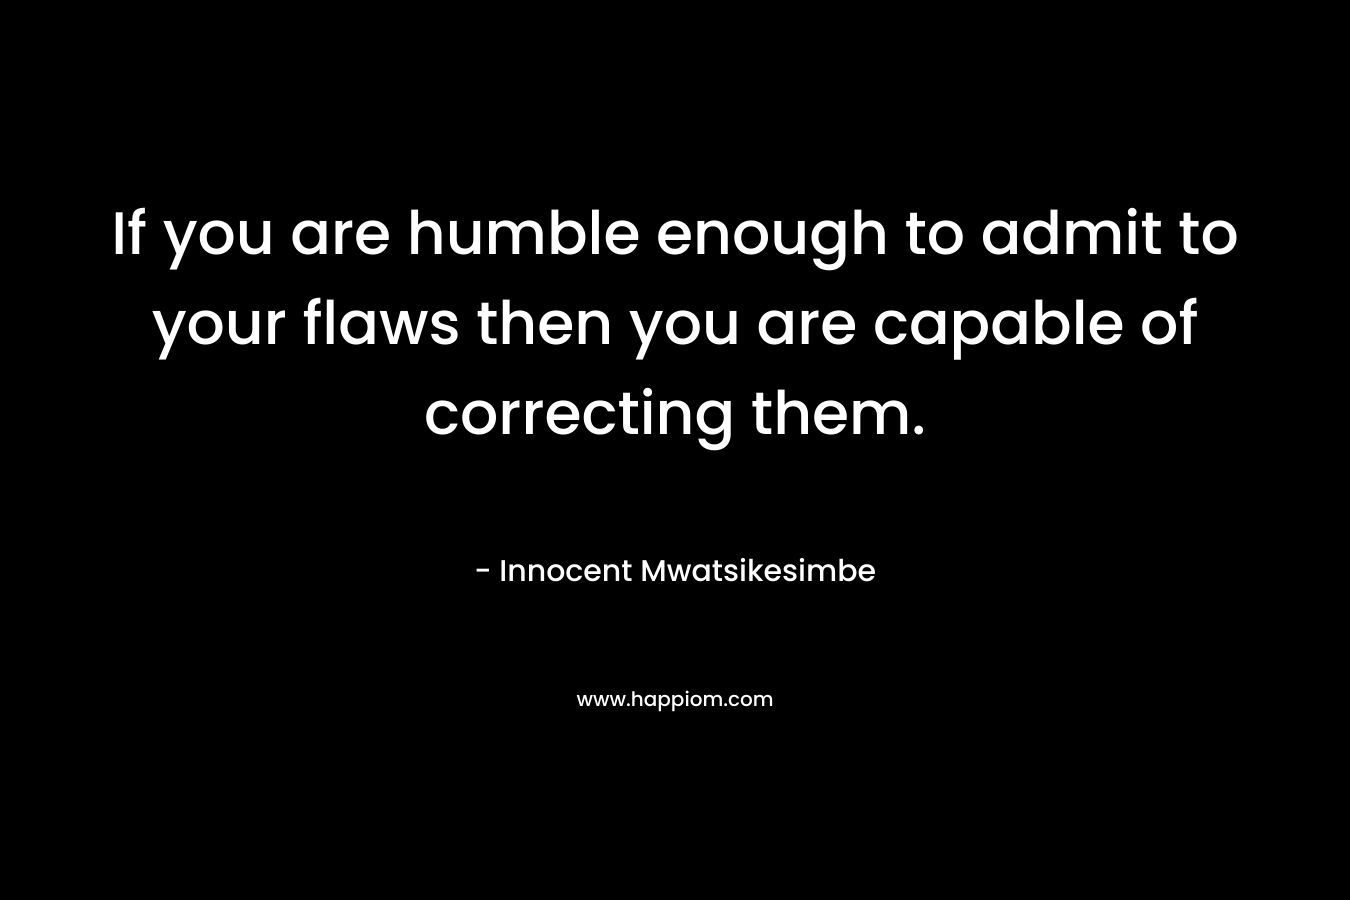 If you are humble enough to admit to your flaws then you are capable of correcting them.